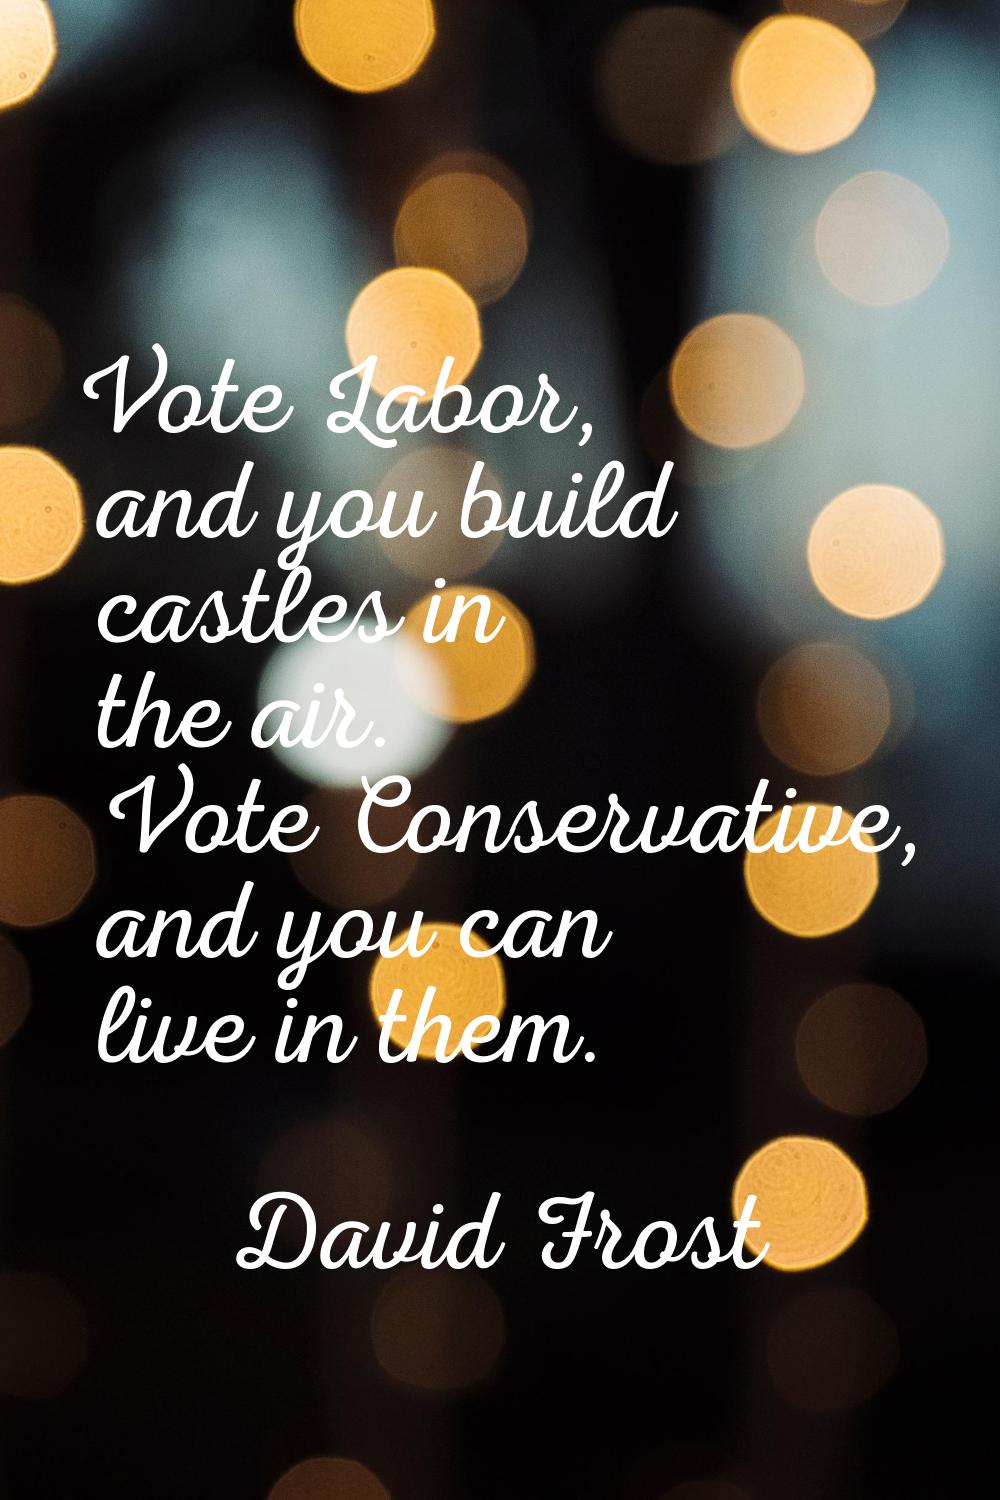 Vote Labor, and you build castles in the air. Vote Conservative, and you can live in them.